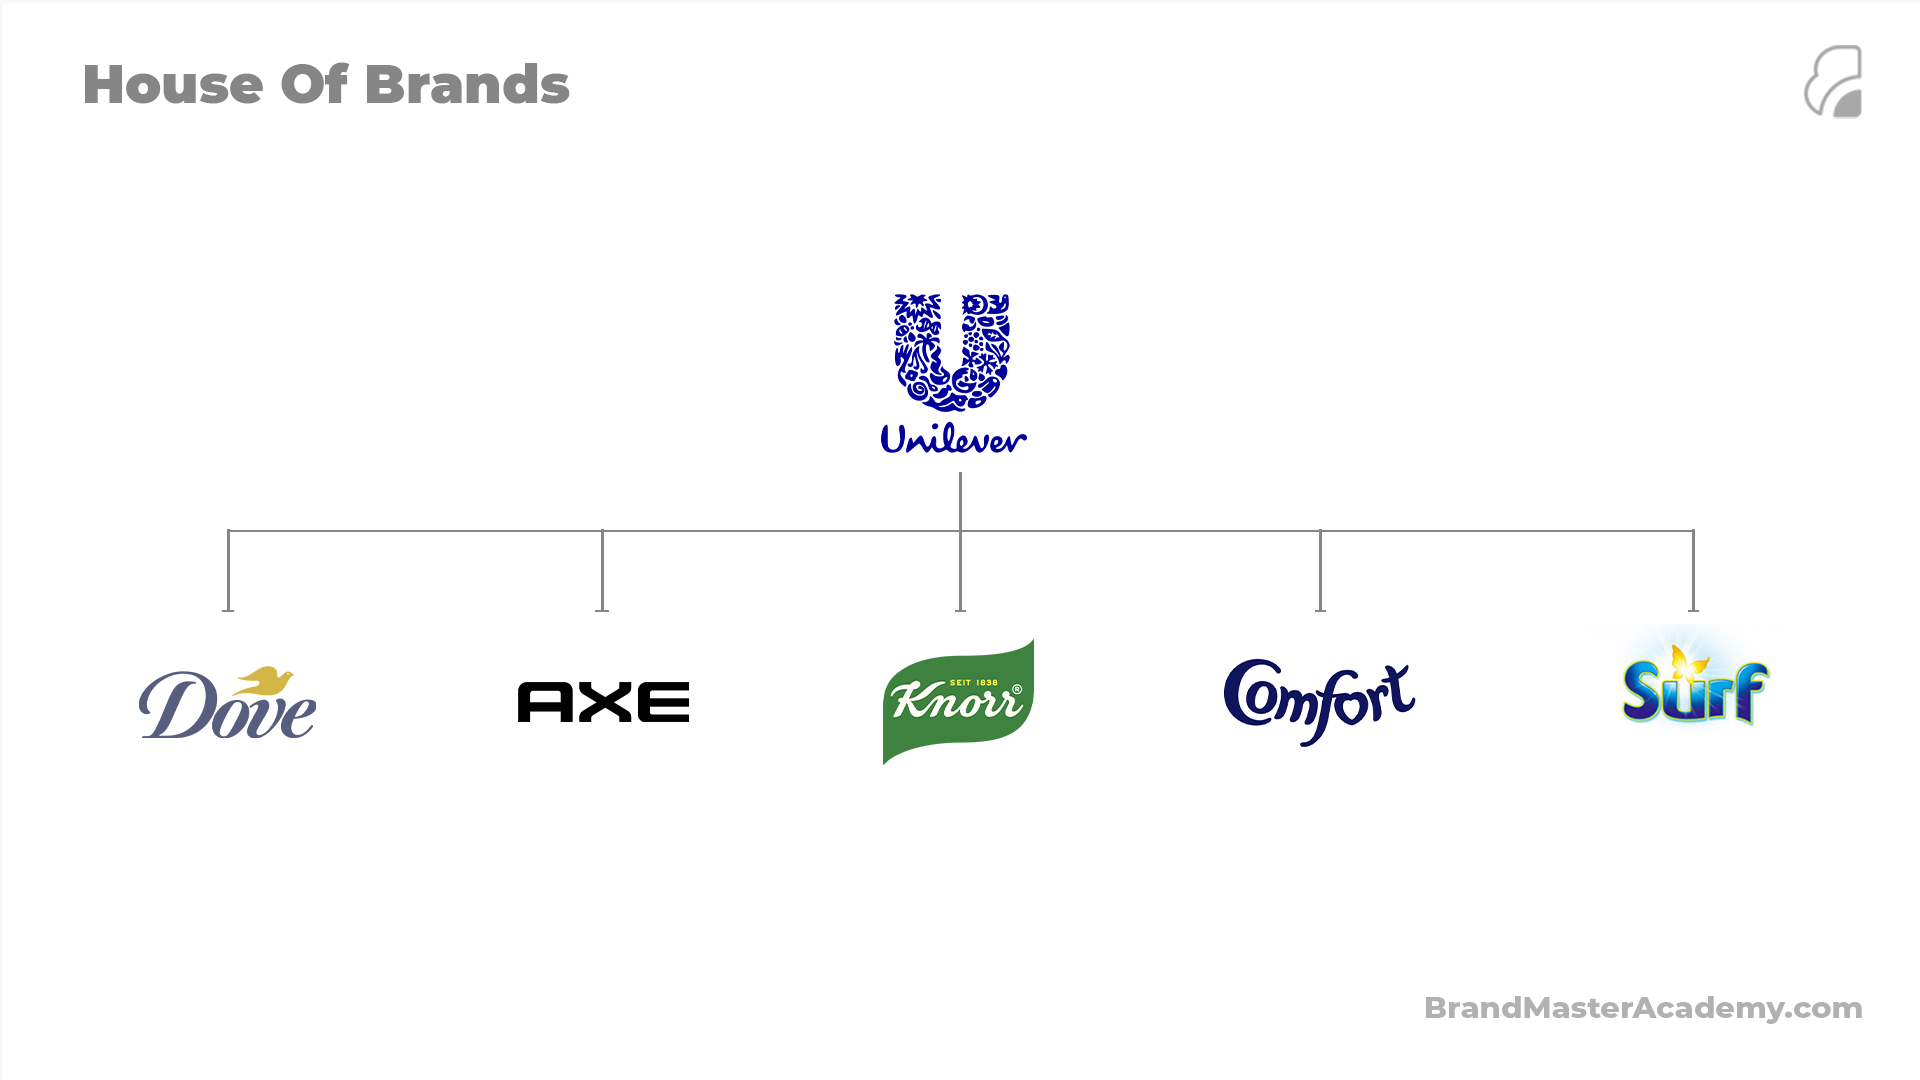 How to Manage Multiple Brands: House of Brands vs. Branded House, by Yasi, Fast Track